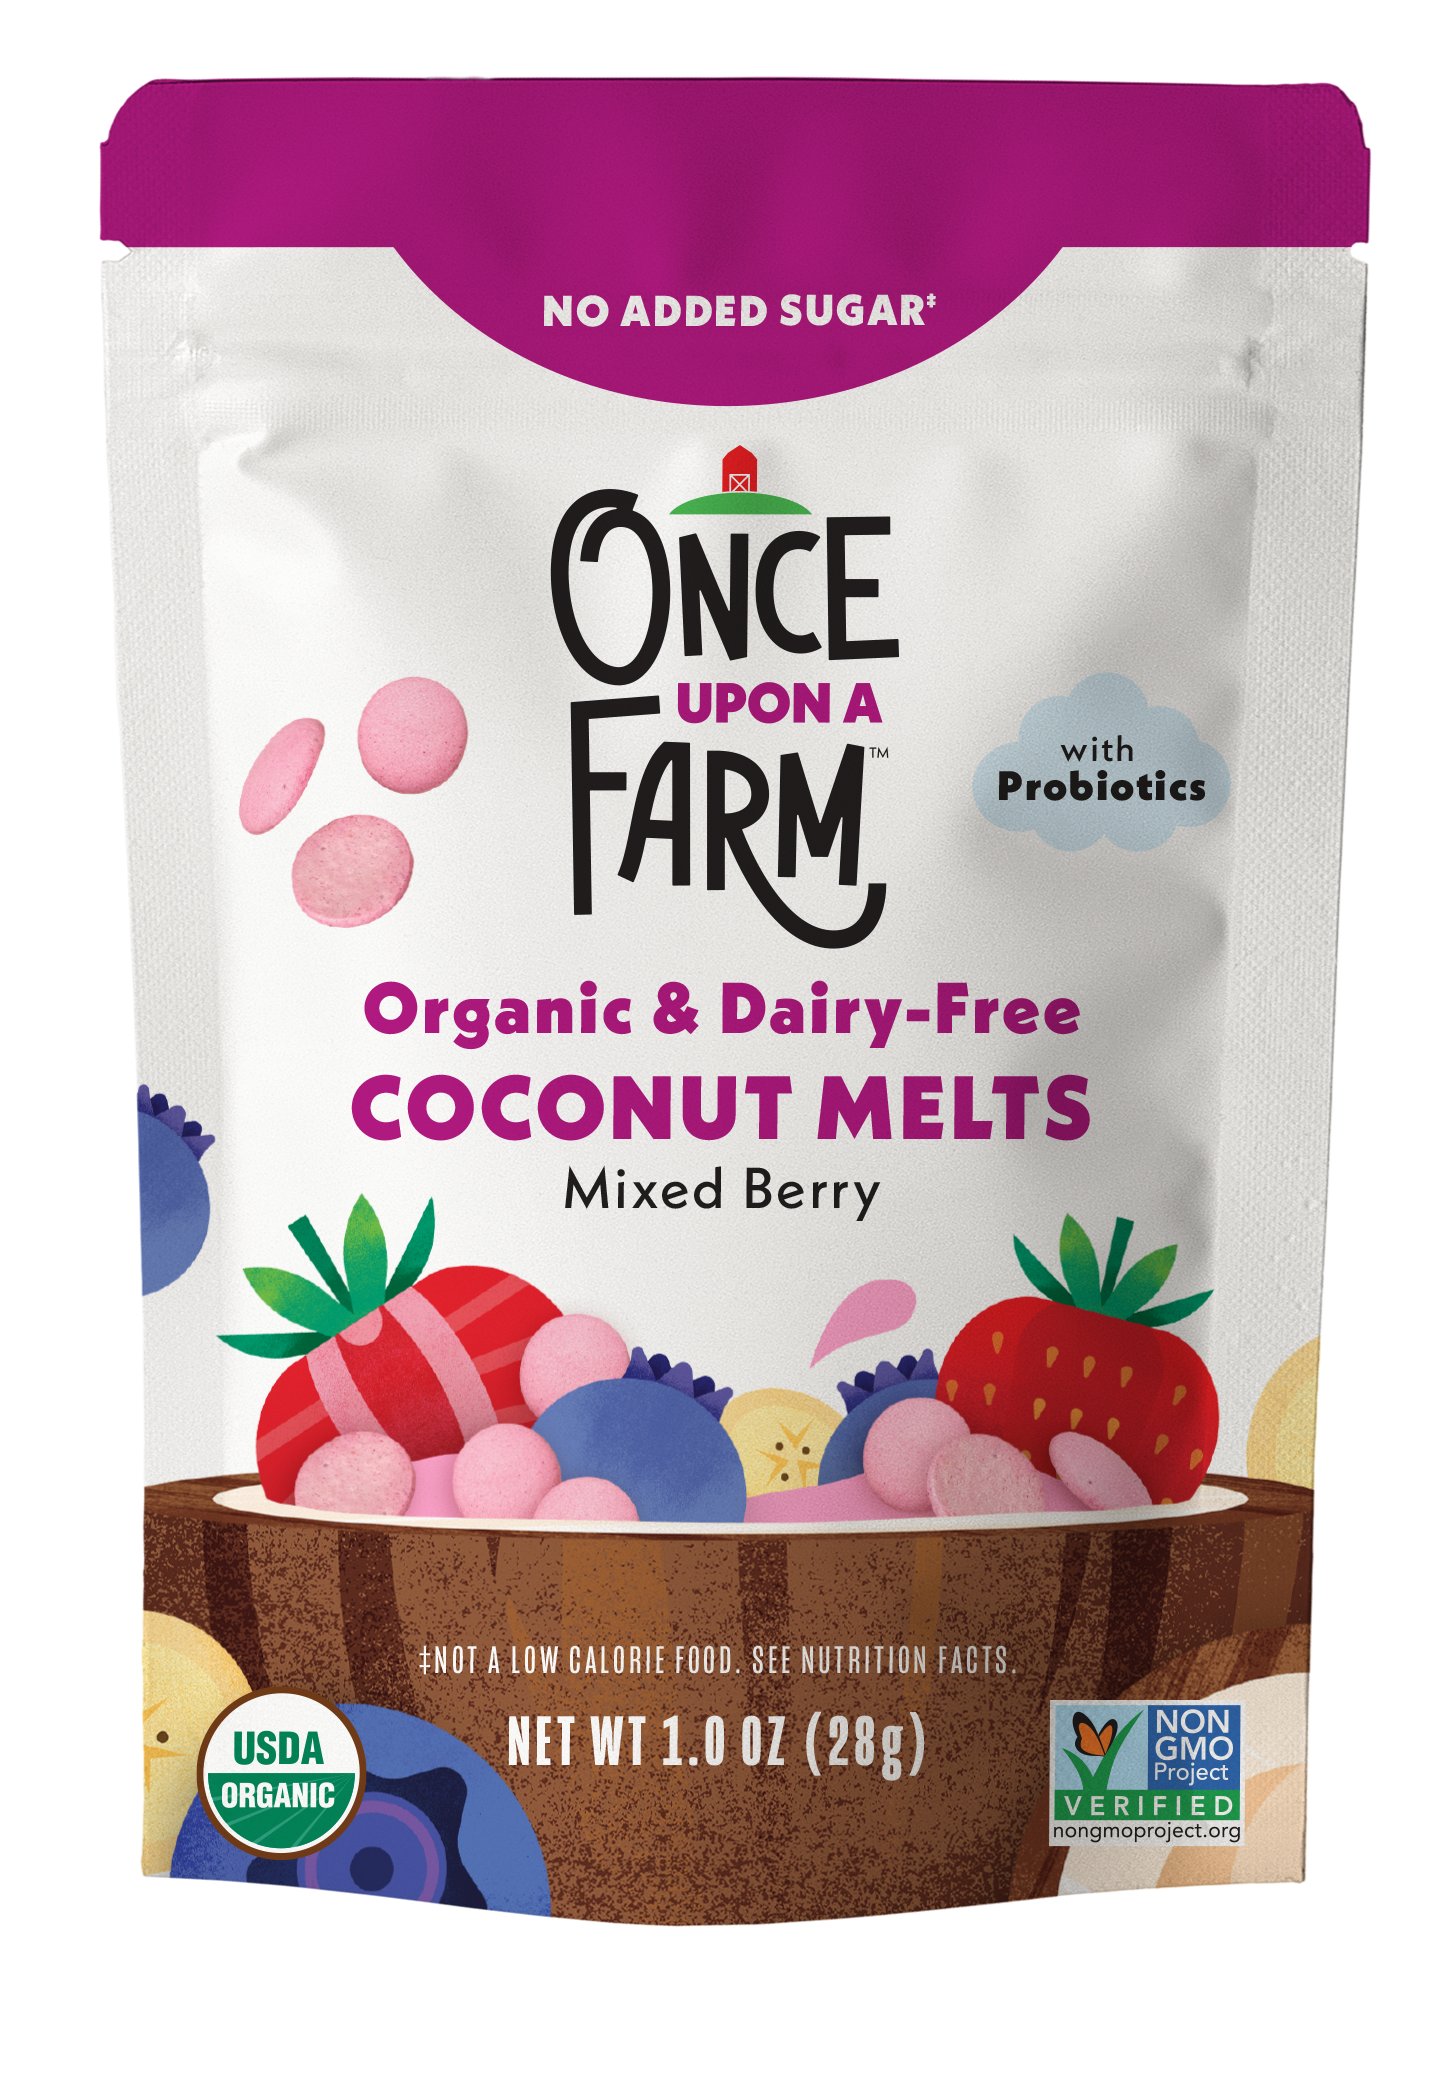 Once Upon a Farm Organic & Dairy-Free Coconut Melts - Mixed Berry ...